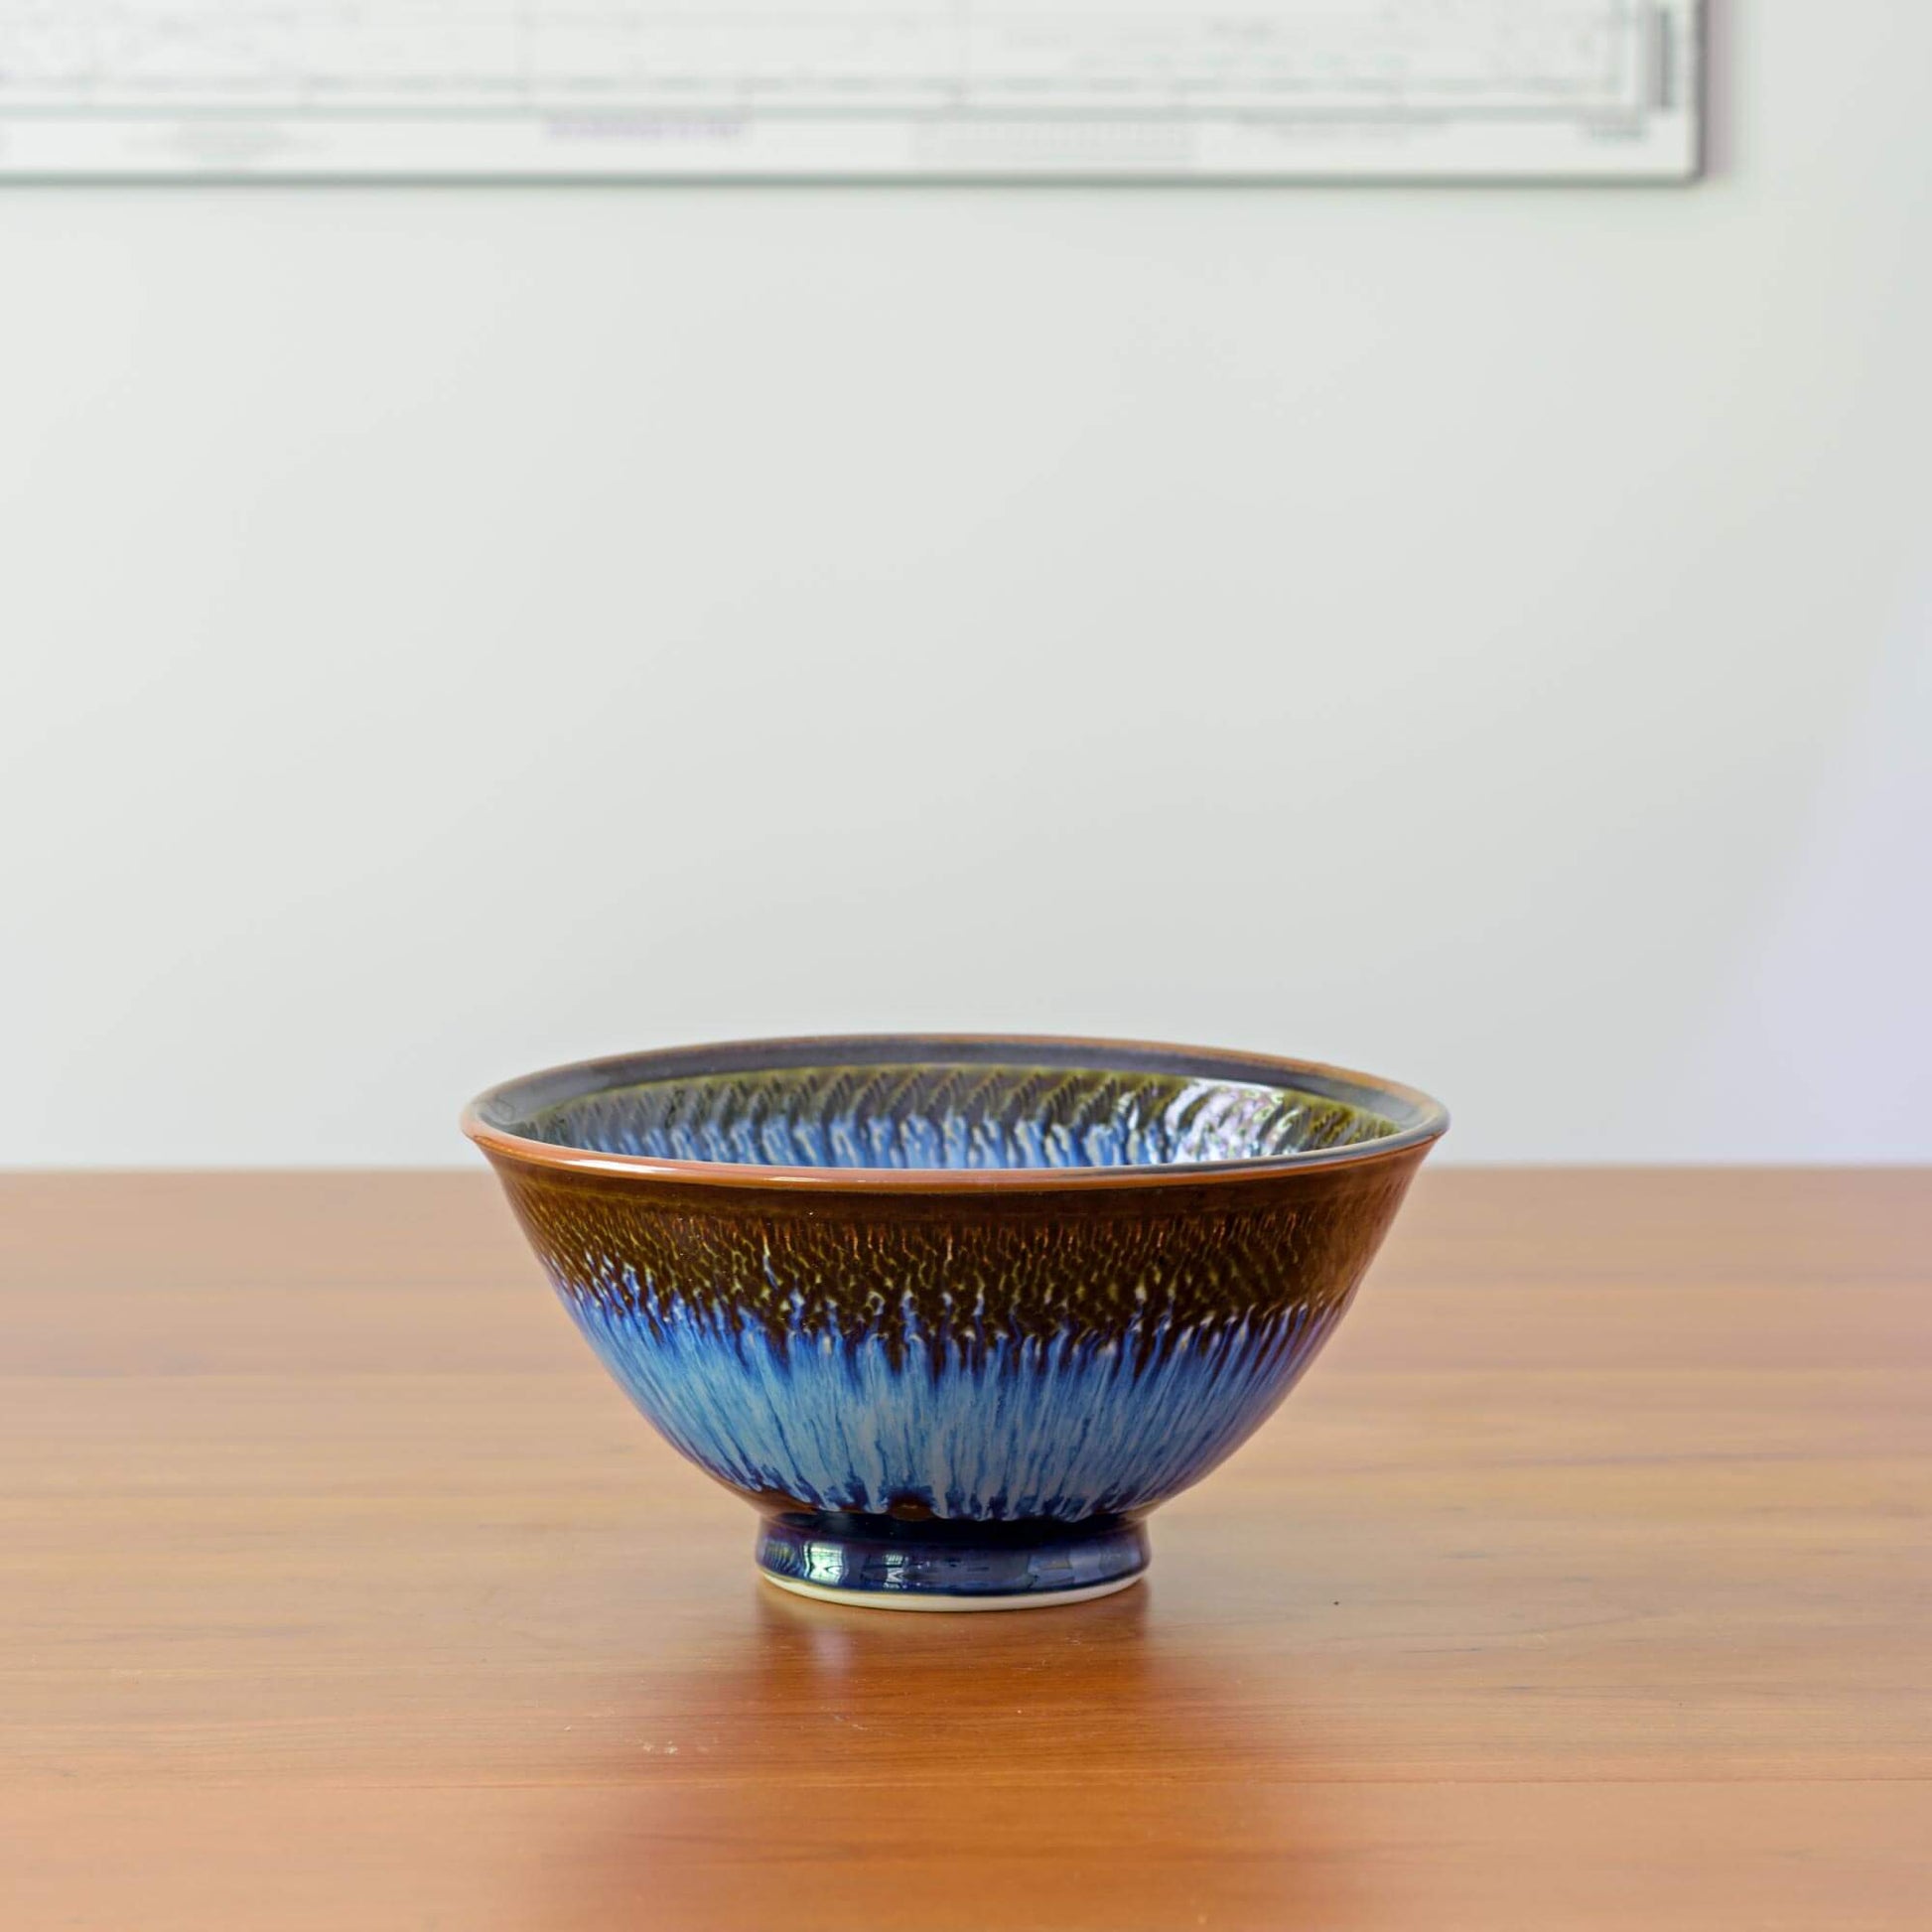 Handmade Pottery Popcorn Bowl in Blue Hamada pattern made by Georgetown Pottery in Maine